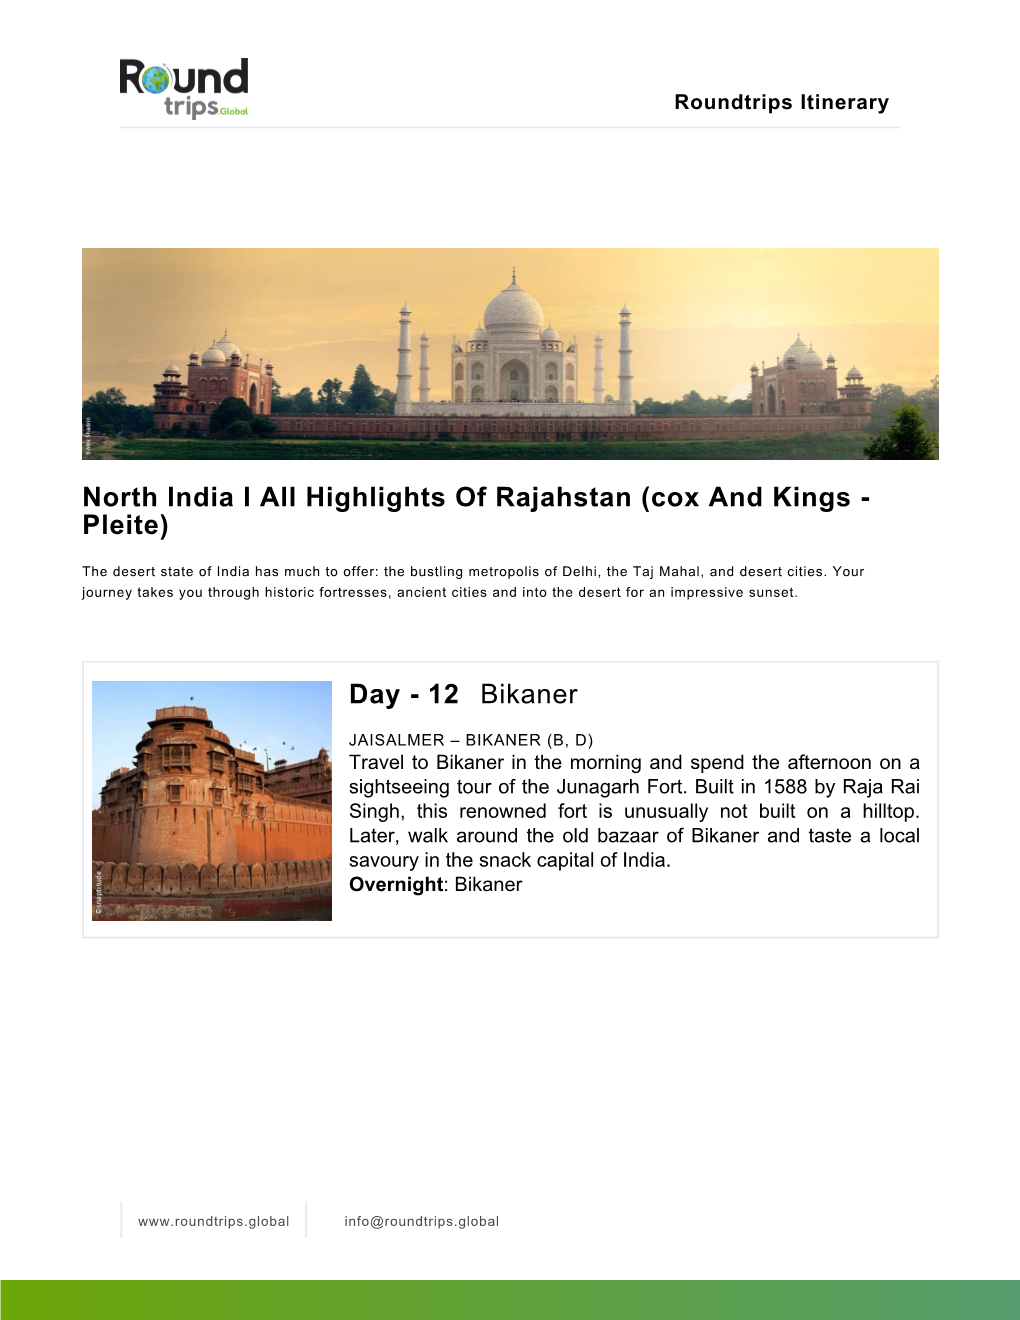 North India I All Highlights of Rajahstan (Cox and Kings - Pleite)